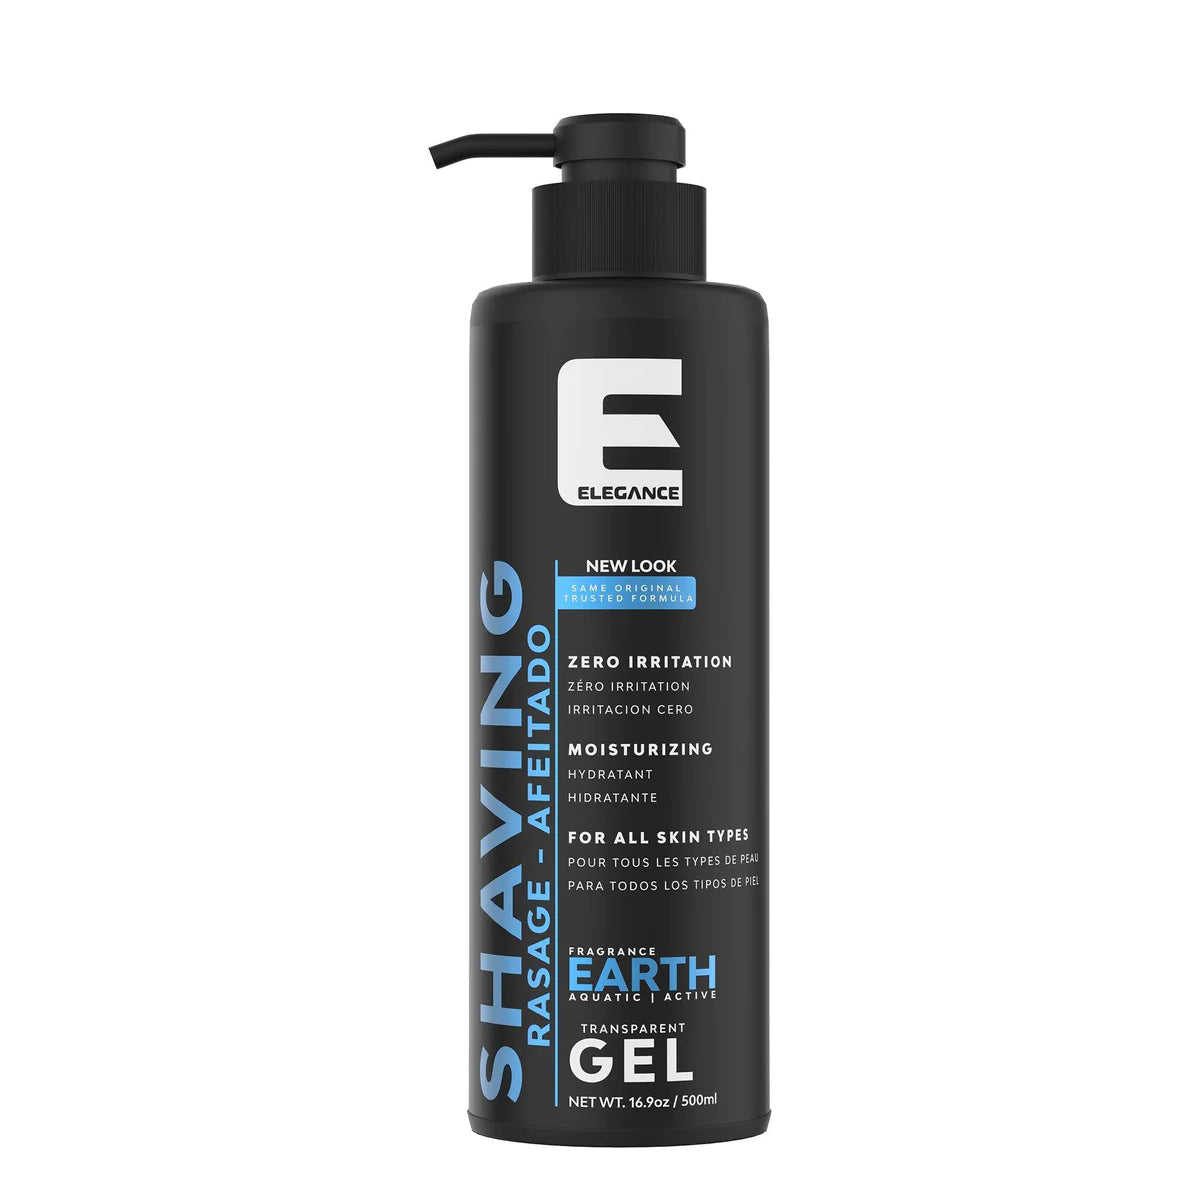 Shaving gel for men 16.9oz - a grooming product for a smooth and comfortable shave.